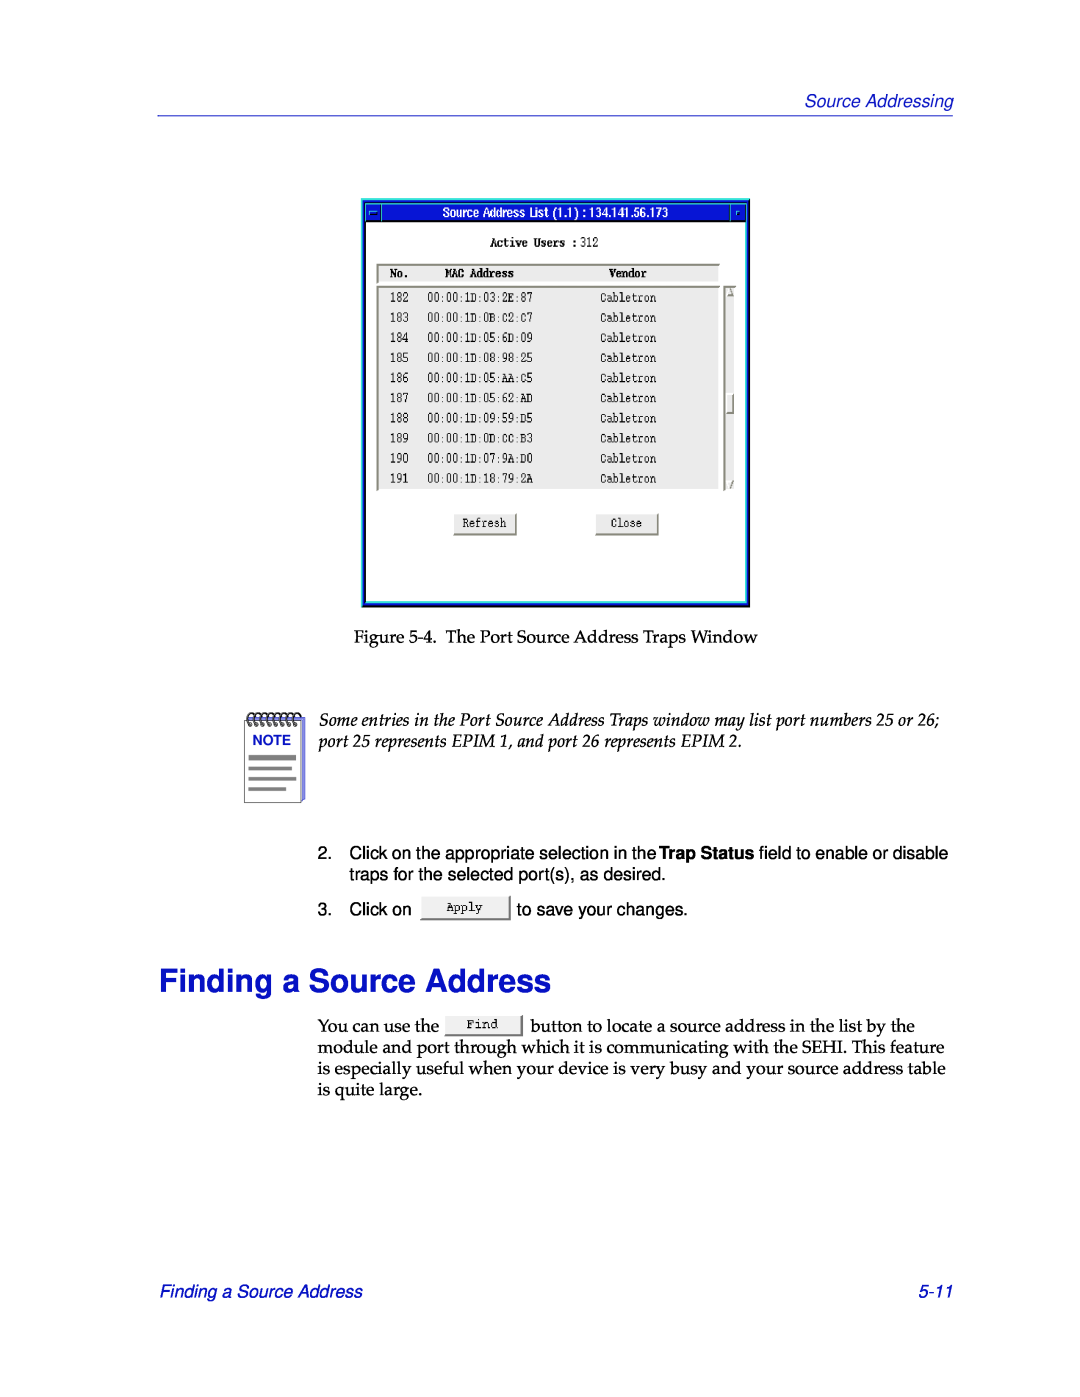 Cabletron Systems SEHI-22/24, SEHI-32/34 manual Finding a Source Address, 5-11, Source Addressing 